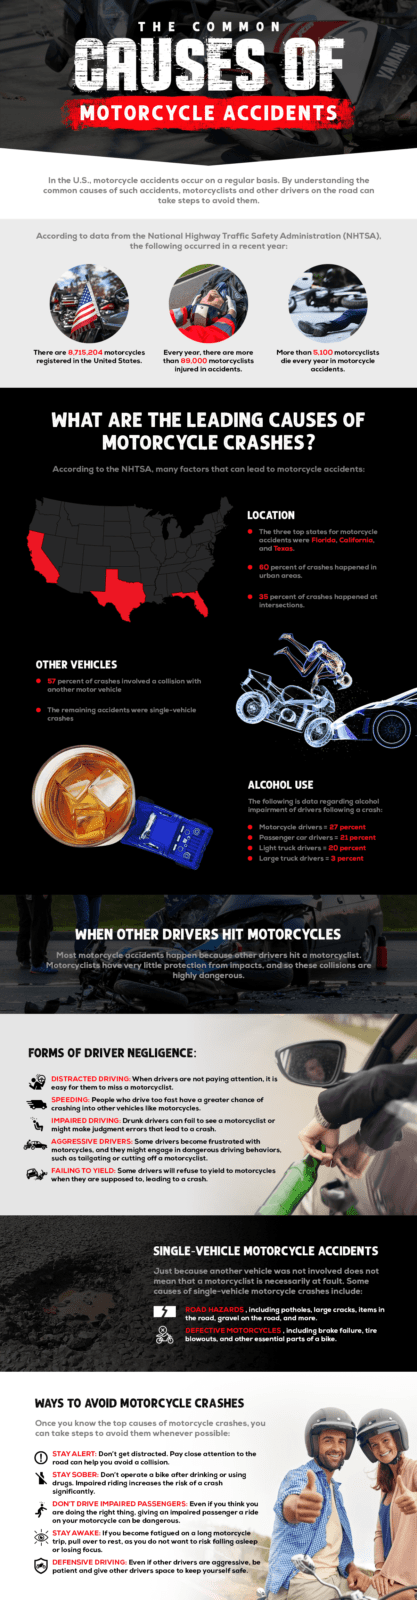 common causes of motorcycle accidents infographic